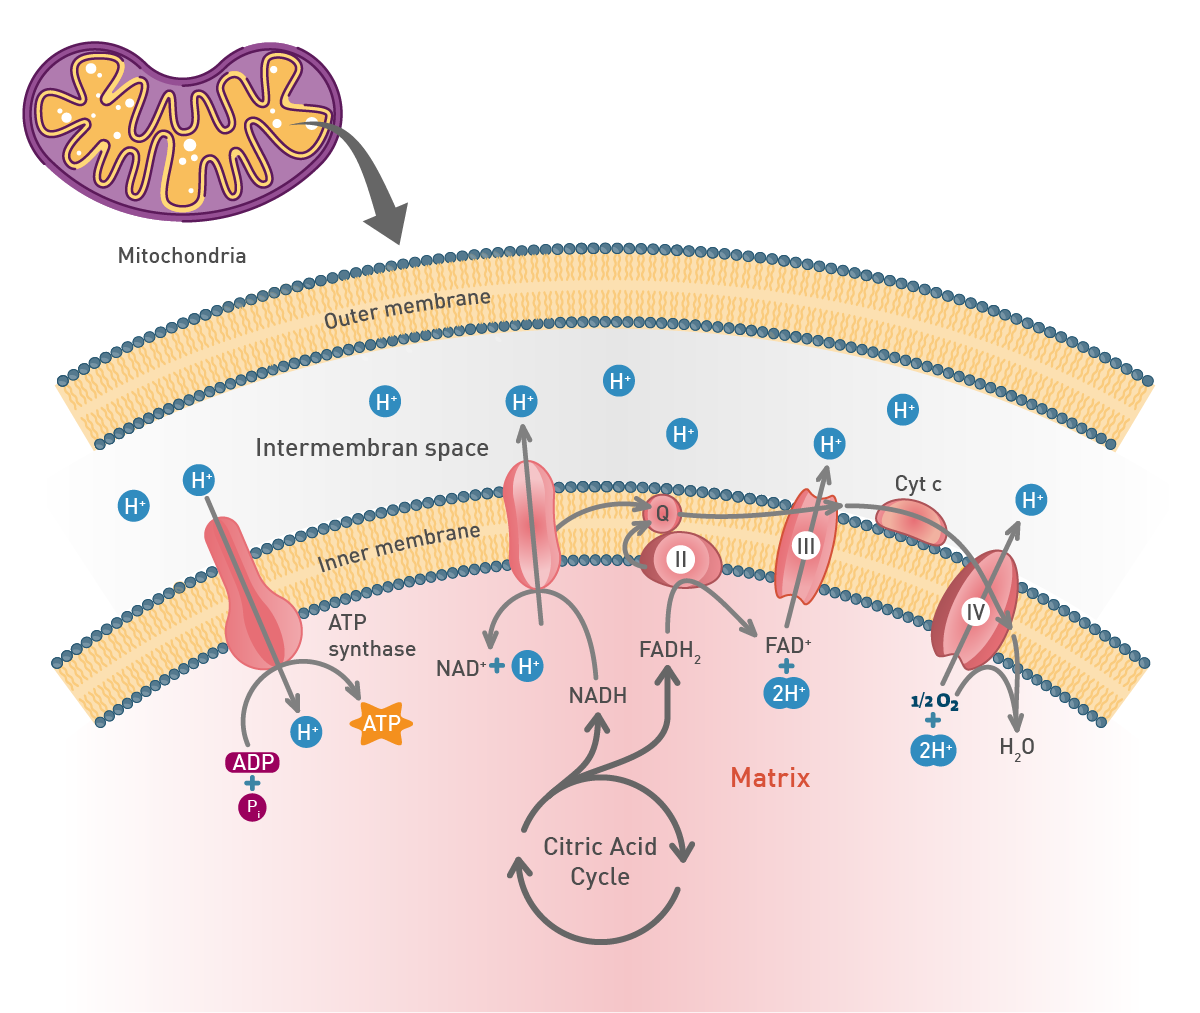 Fig. 7: Schematic of the electron transport system in the mitochondrion